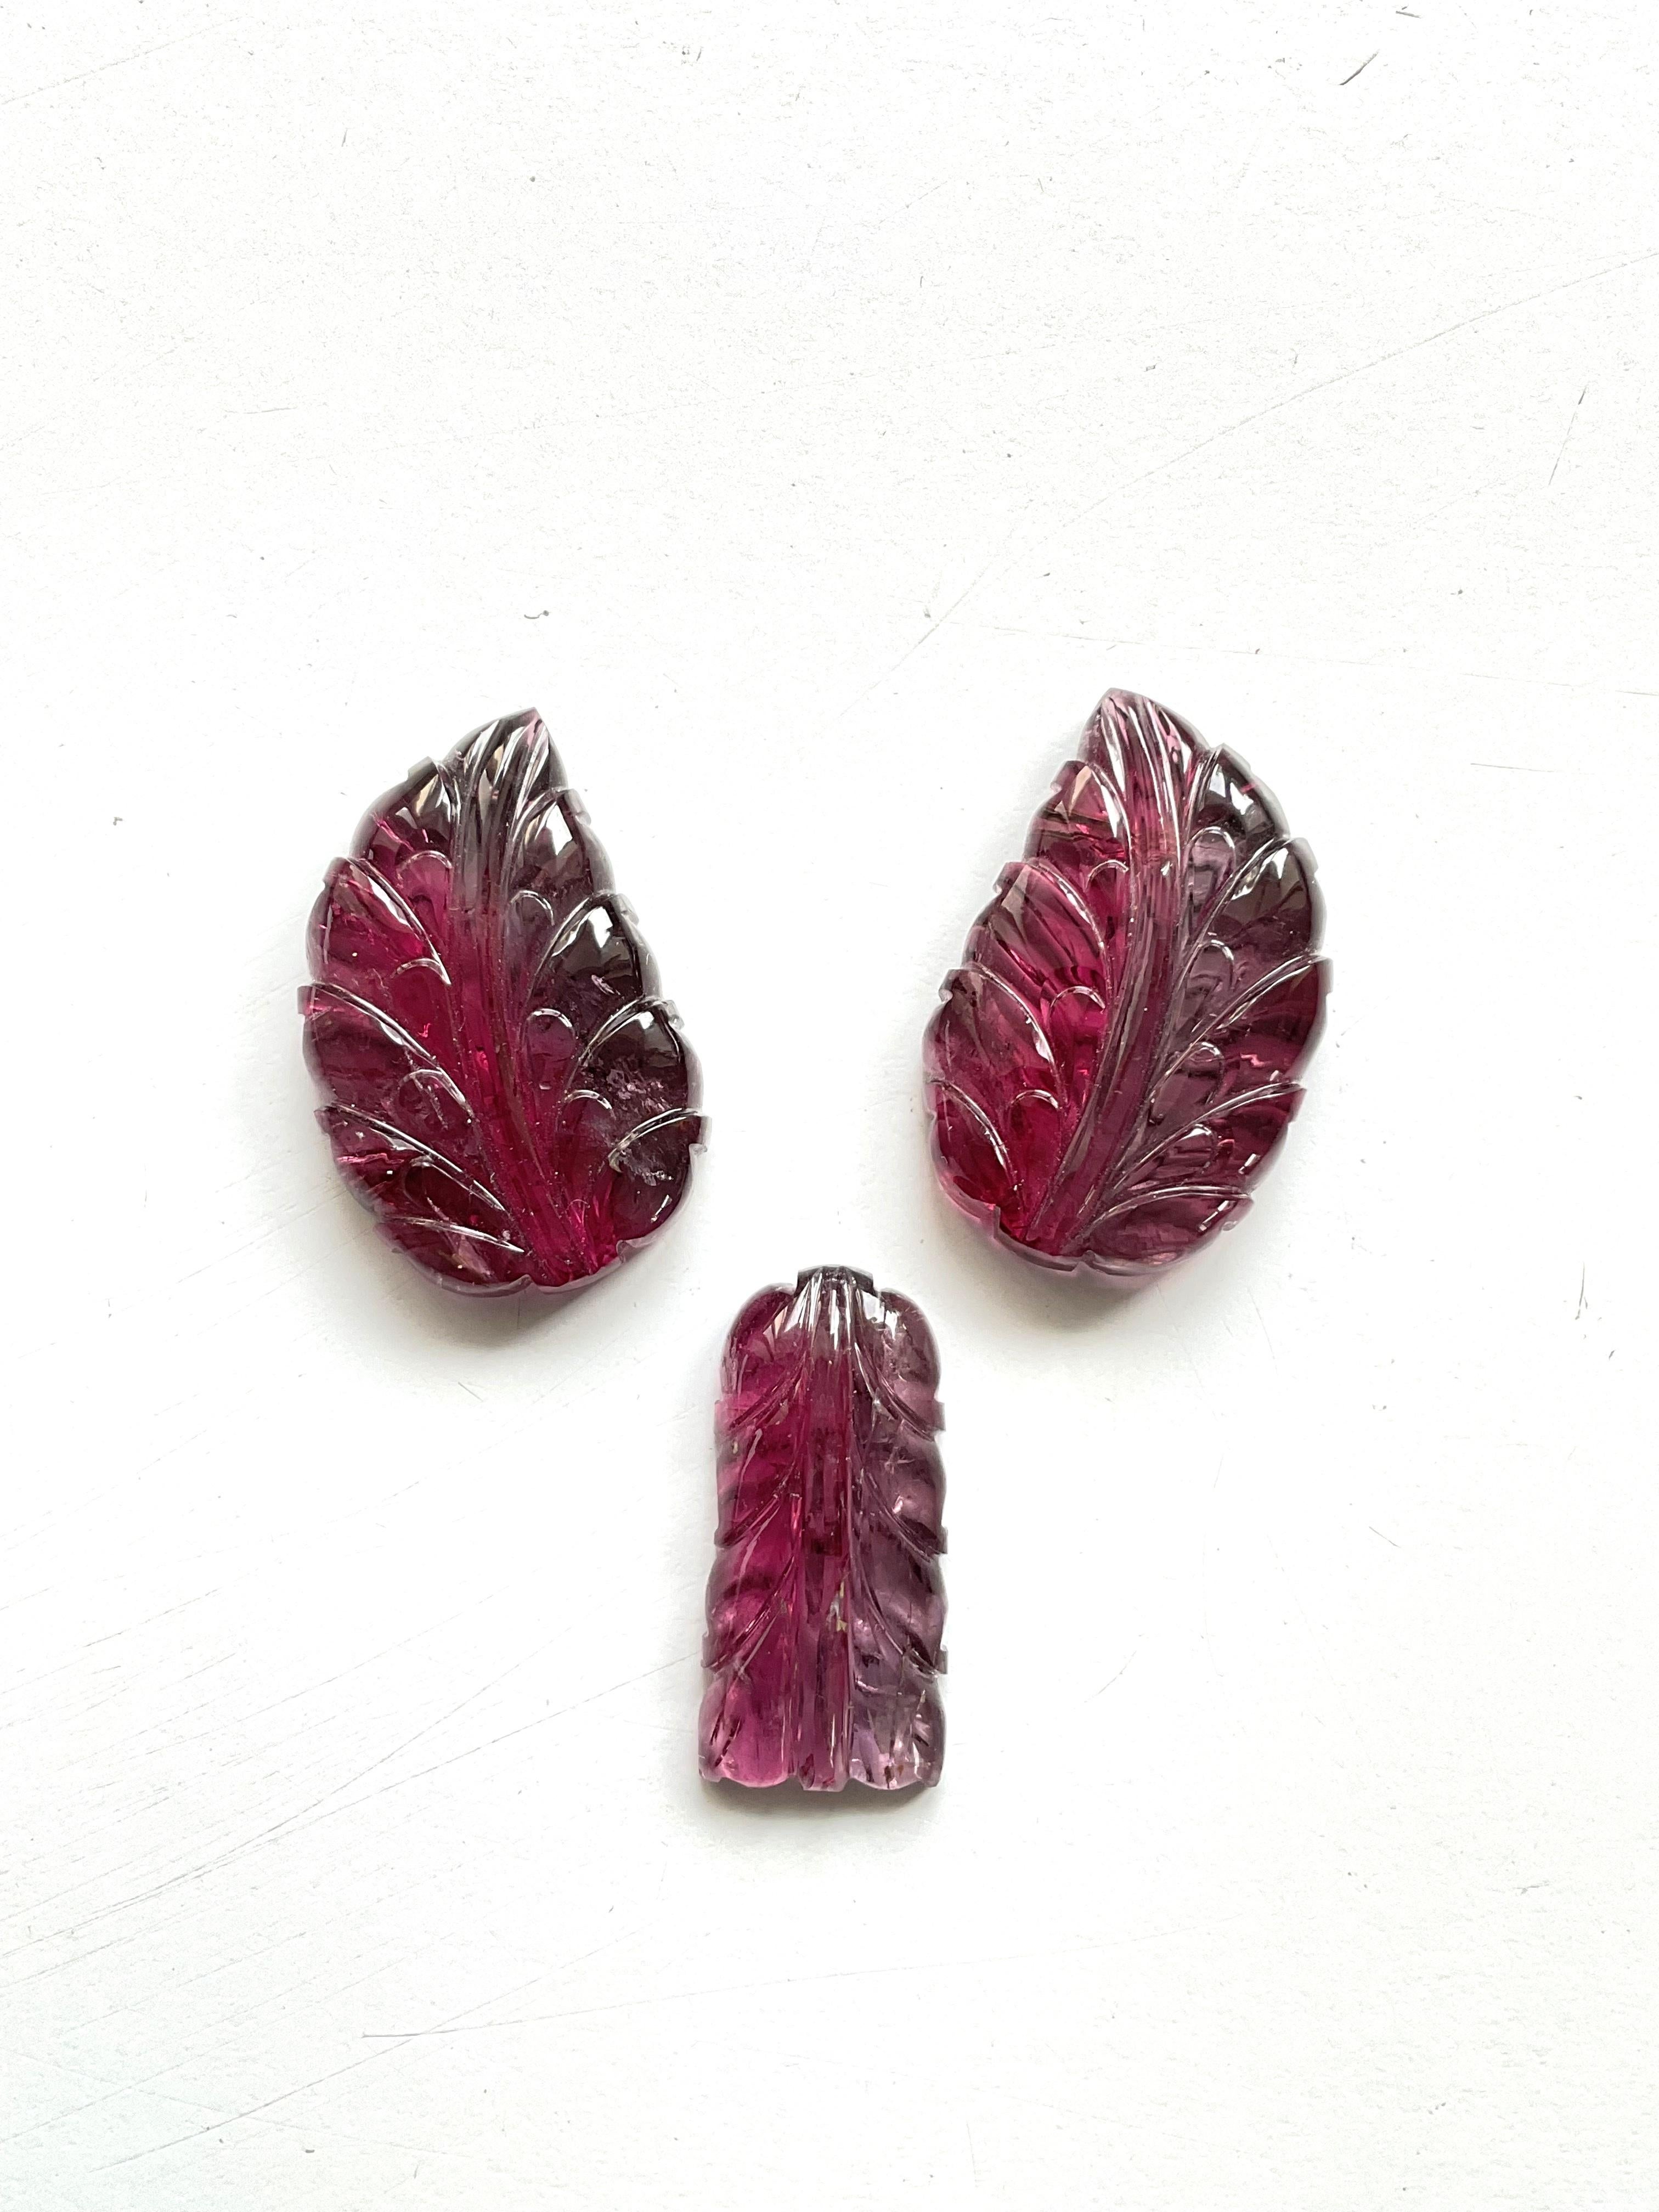 Art Deco 84.37 Carats Rubellite Tourmaline Carved Leaf 3 Pieces Fine jewelry Natural Gem For Sale